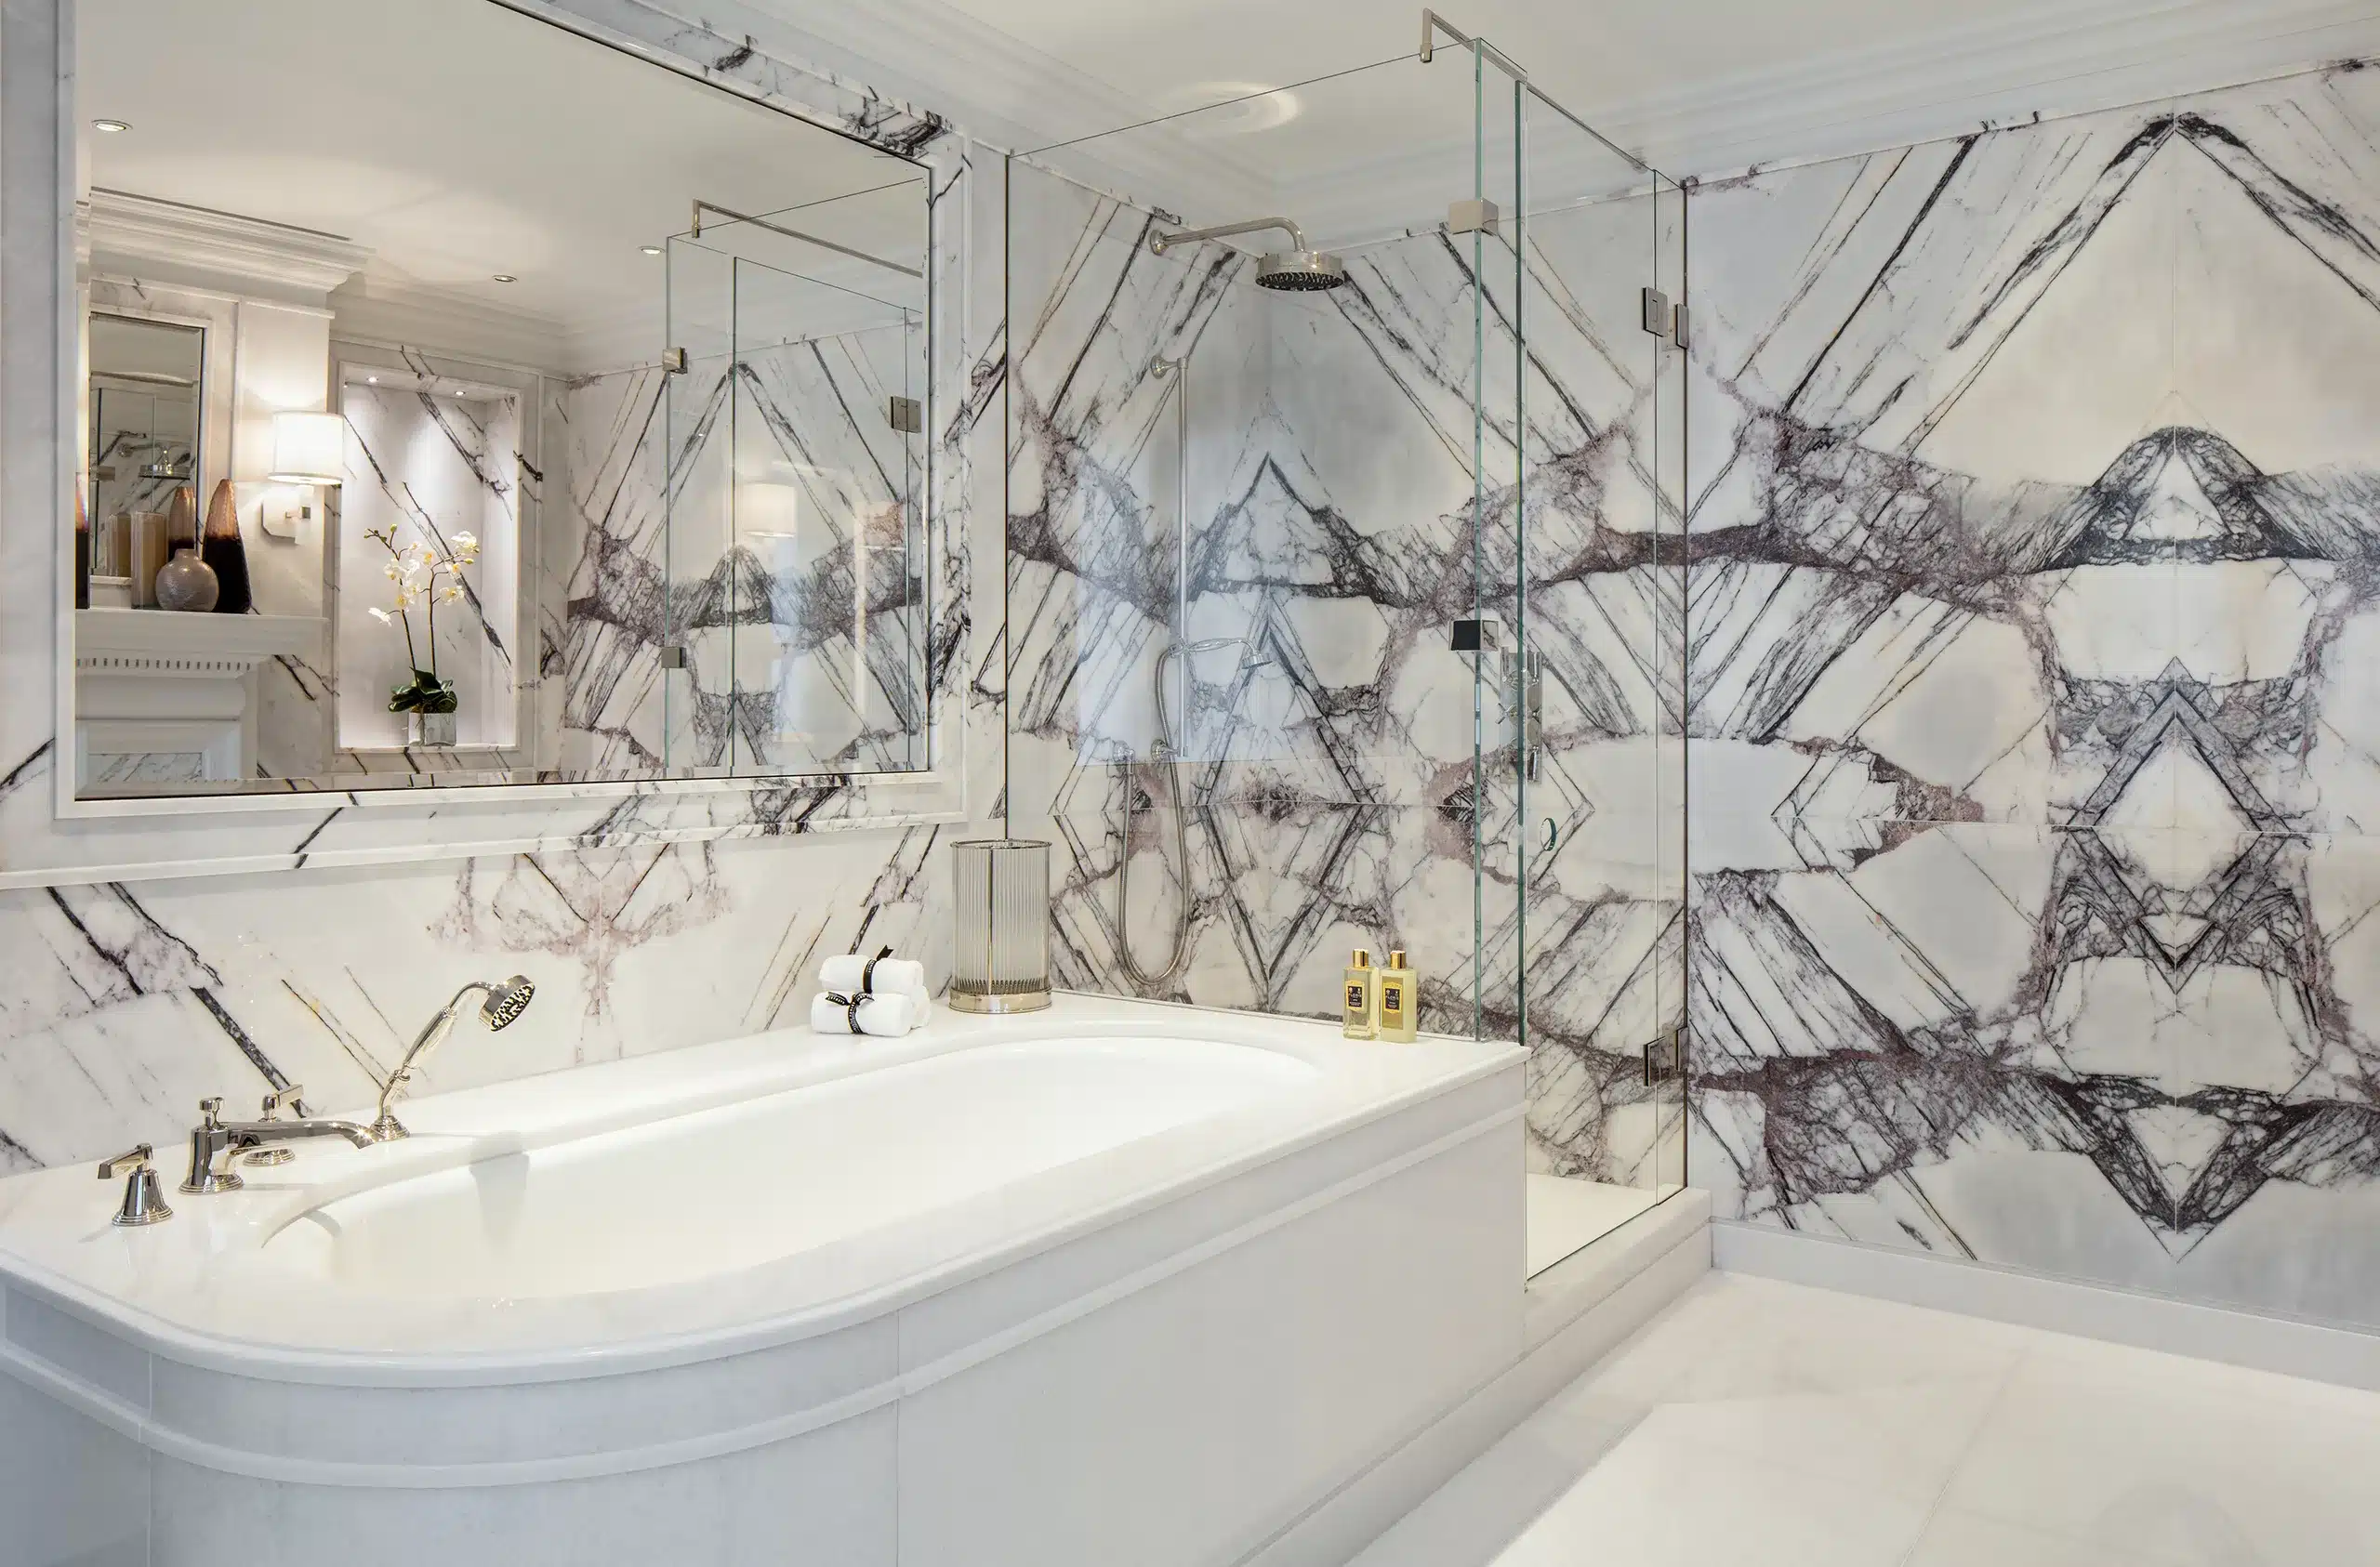 An opulent marble bathroom in a residential home in central London